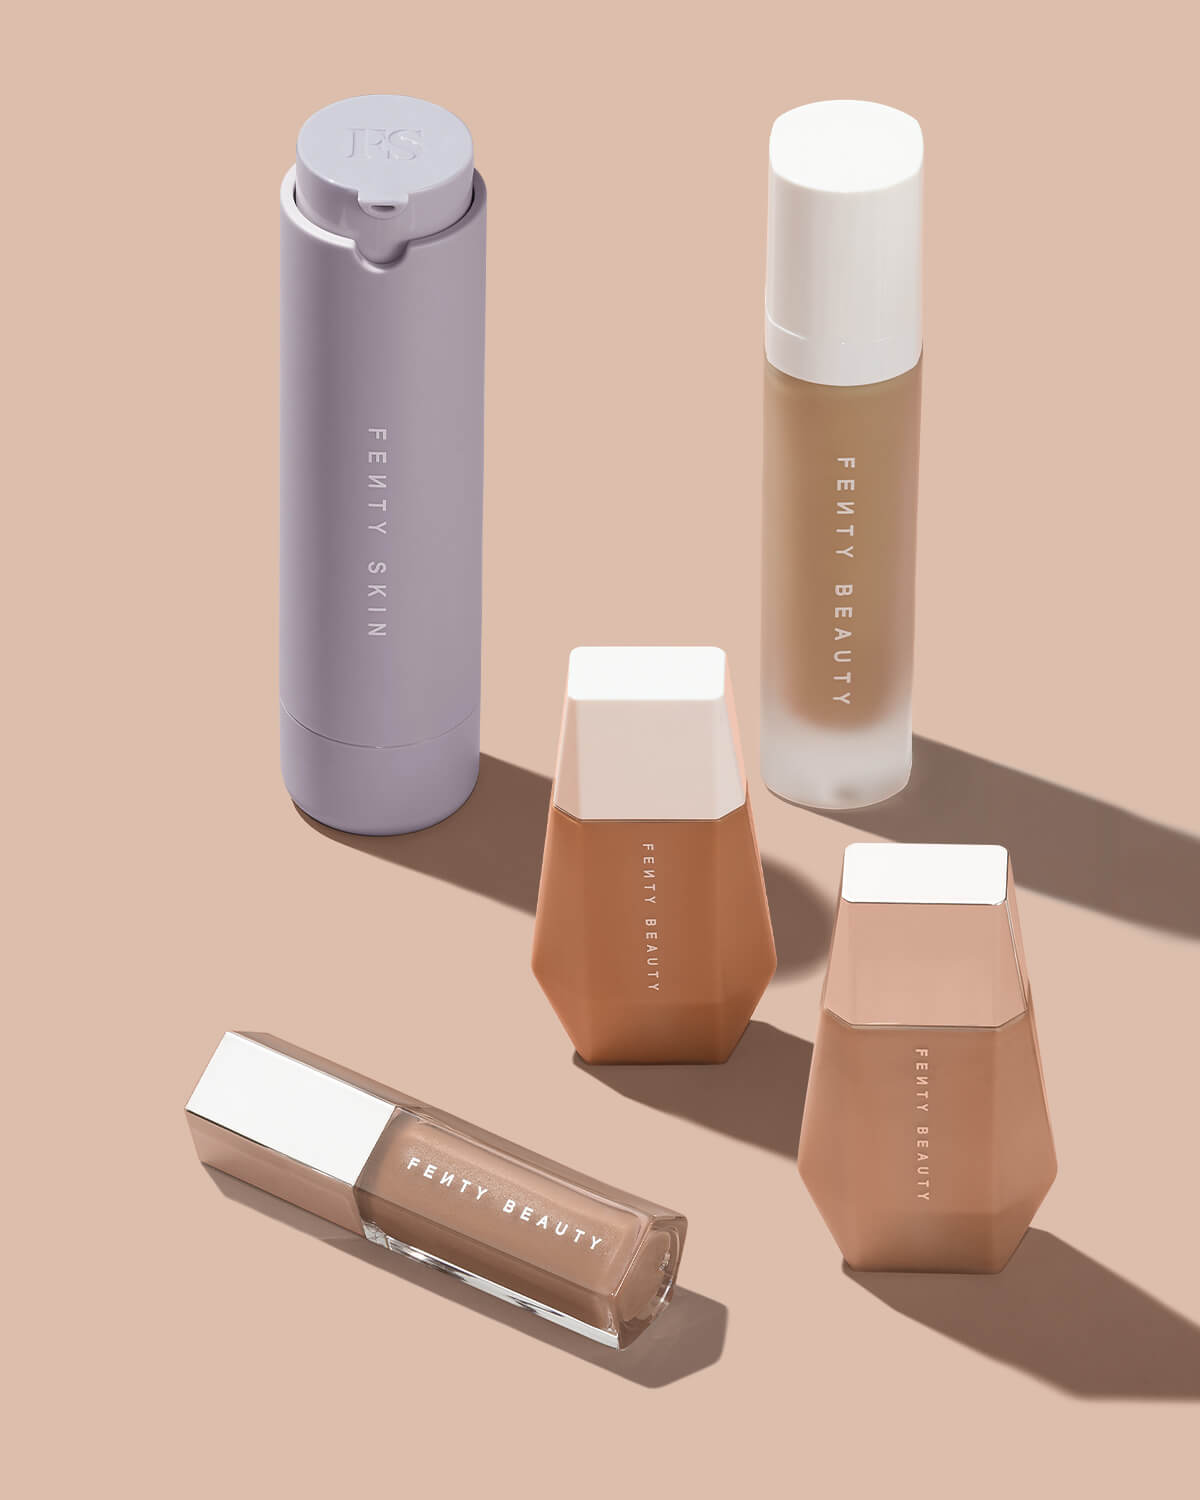 Fenty Beauty Boots Savings: How To Get £84 Of Beauty Products For